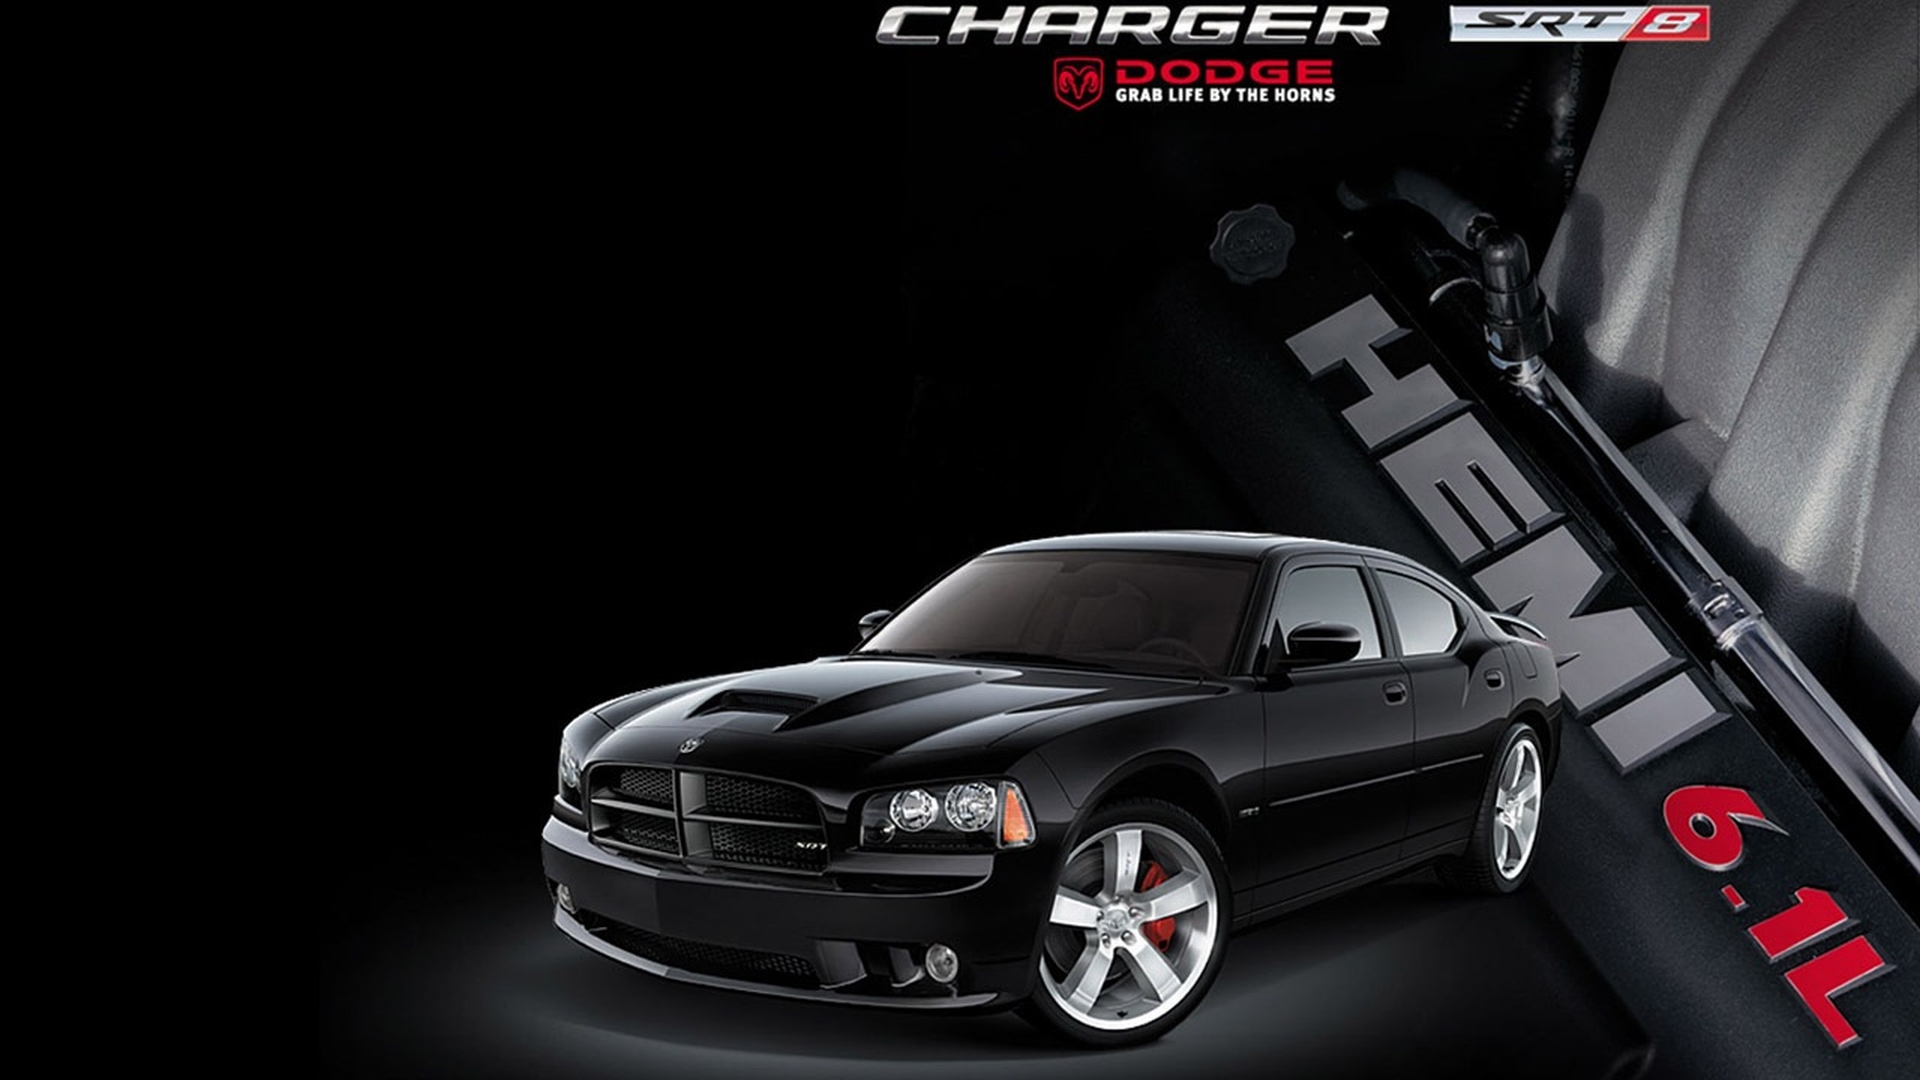 Dodge Charger Computer Wallpapers, Desktop Backgrounds | 1920x1080 | ID